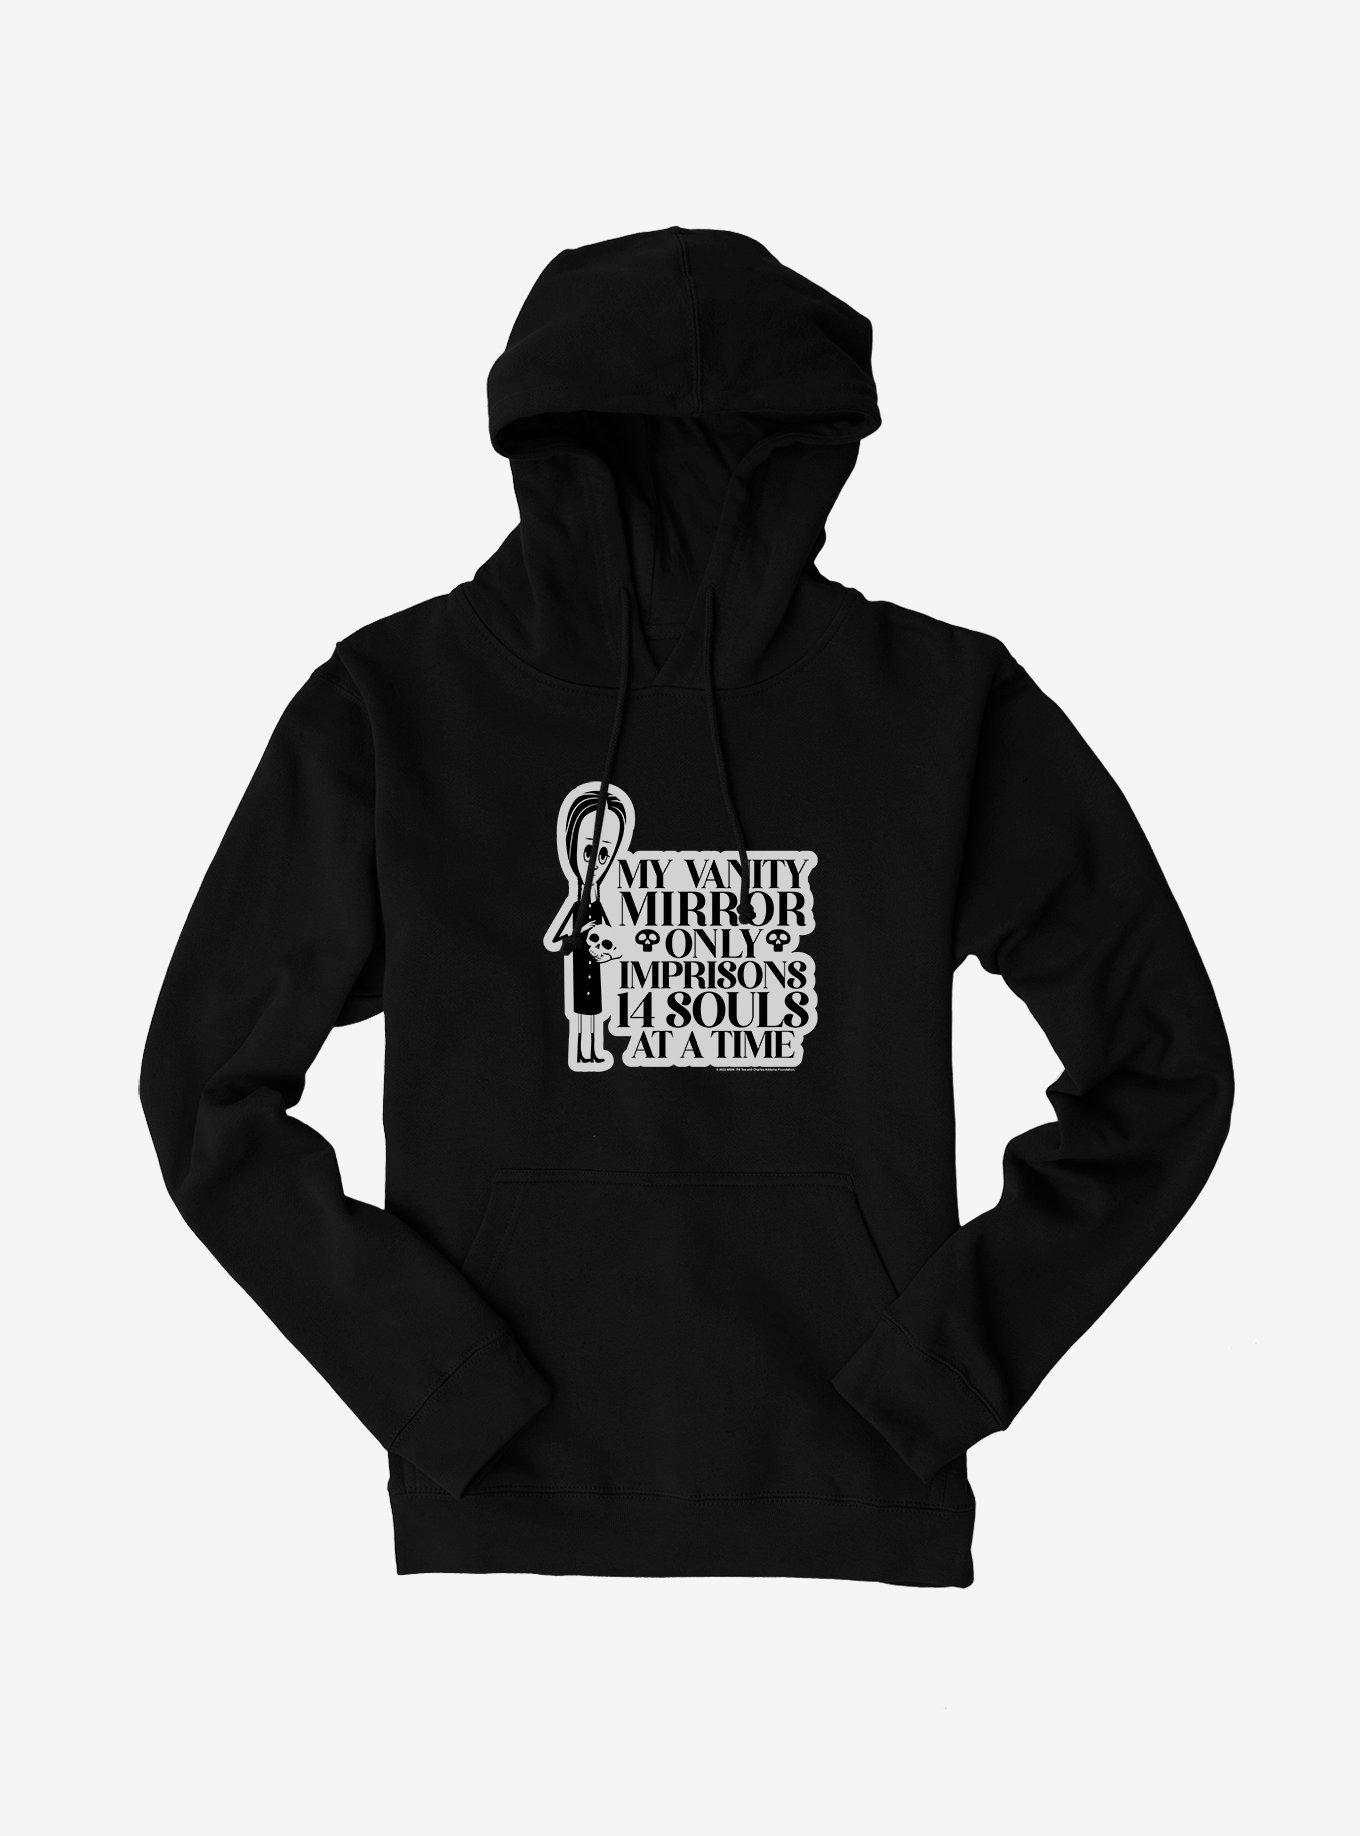 Addams Family Movie 14 Souls At A Time Hoodie, , hi-res